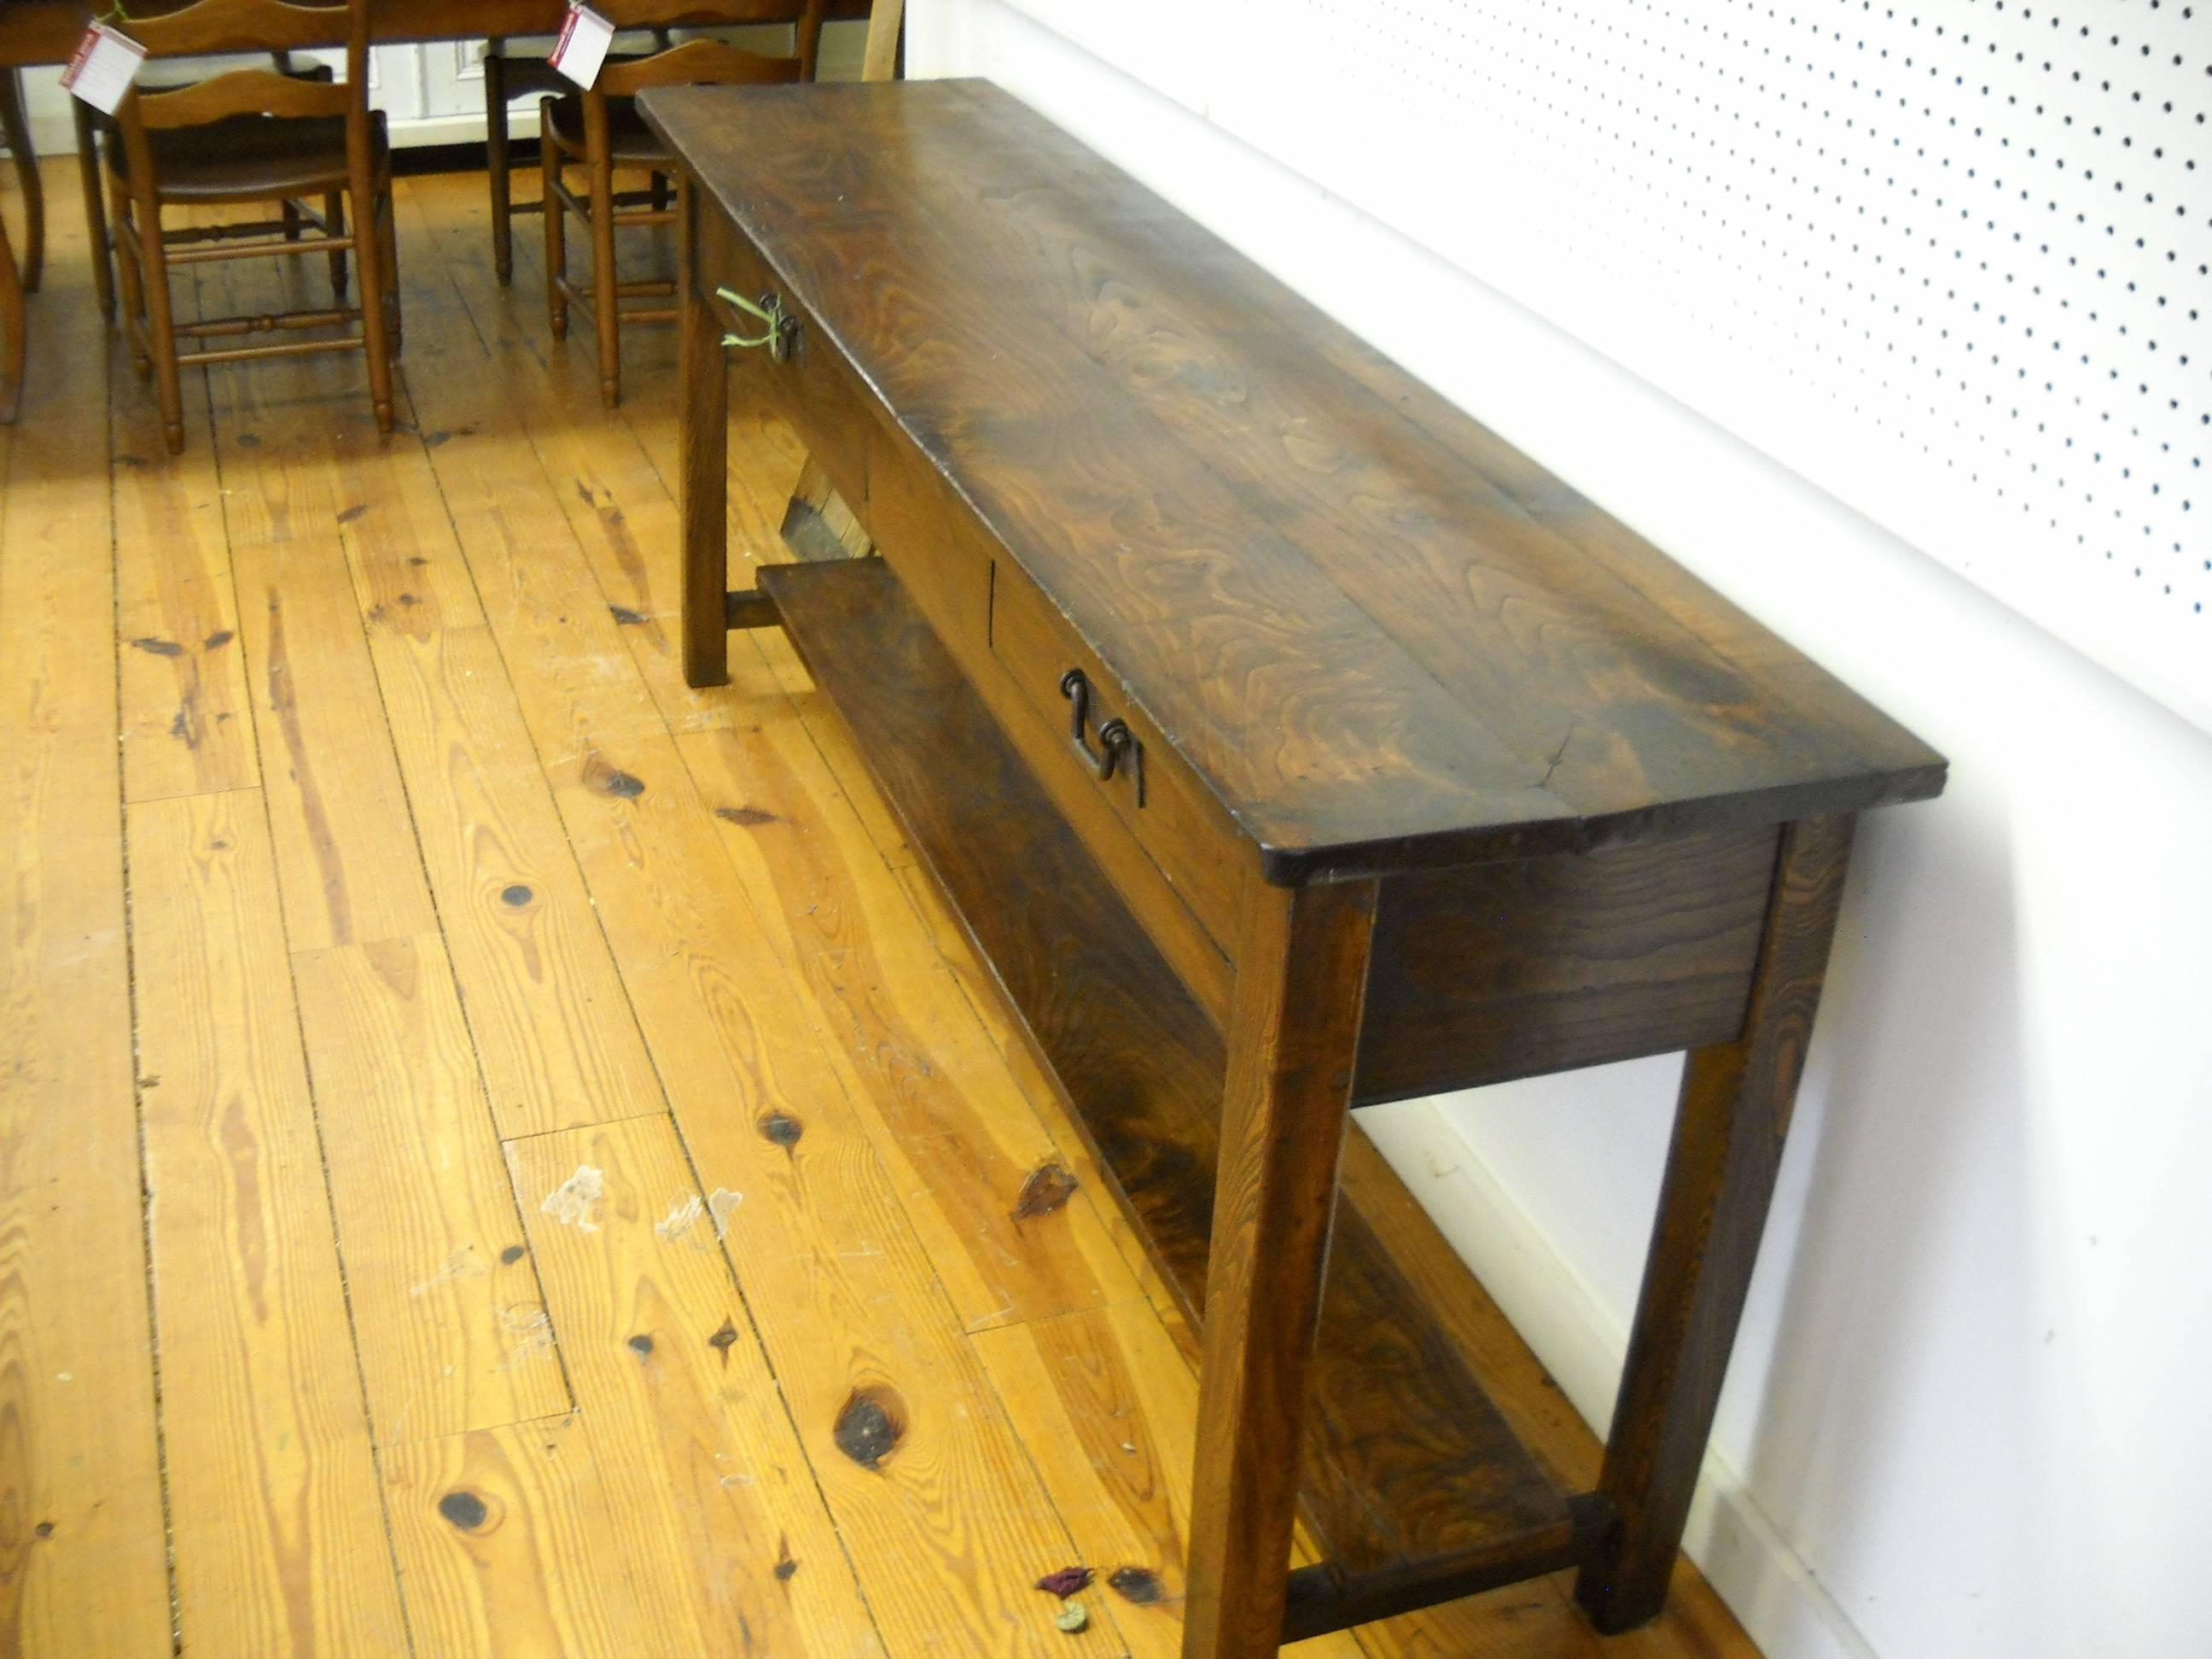 Chestnut is one of our favorite darker woods and combined with this 79 inch serving table with two uneven drawers and original hardware makes this a difficult piece to ignore. The French loves drawers of different sizes and everything about this